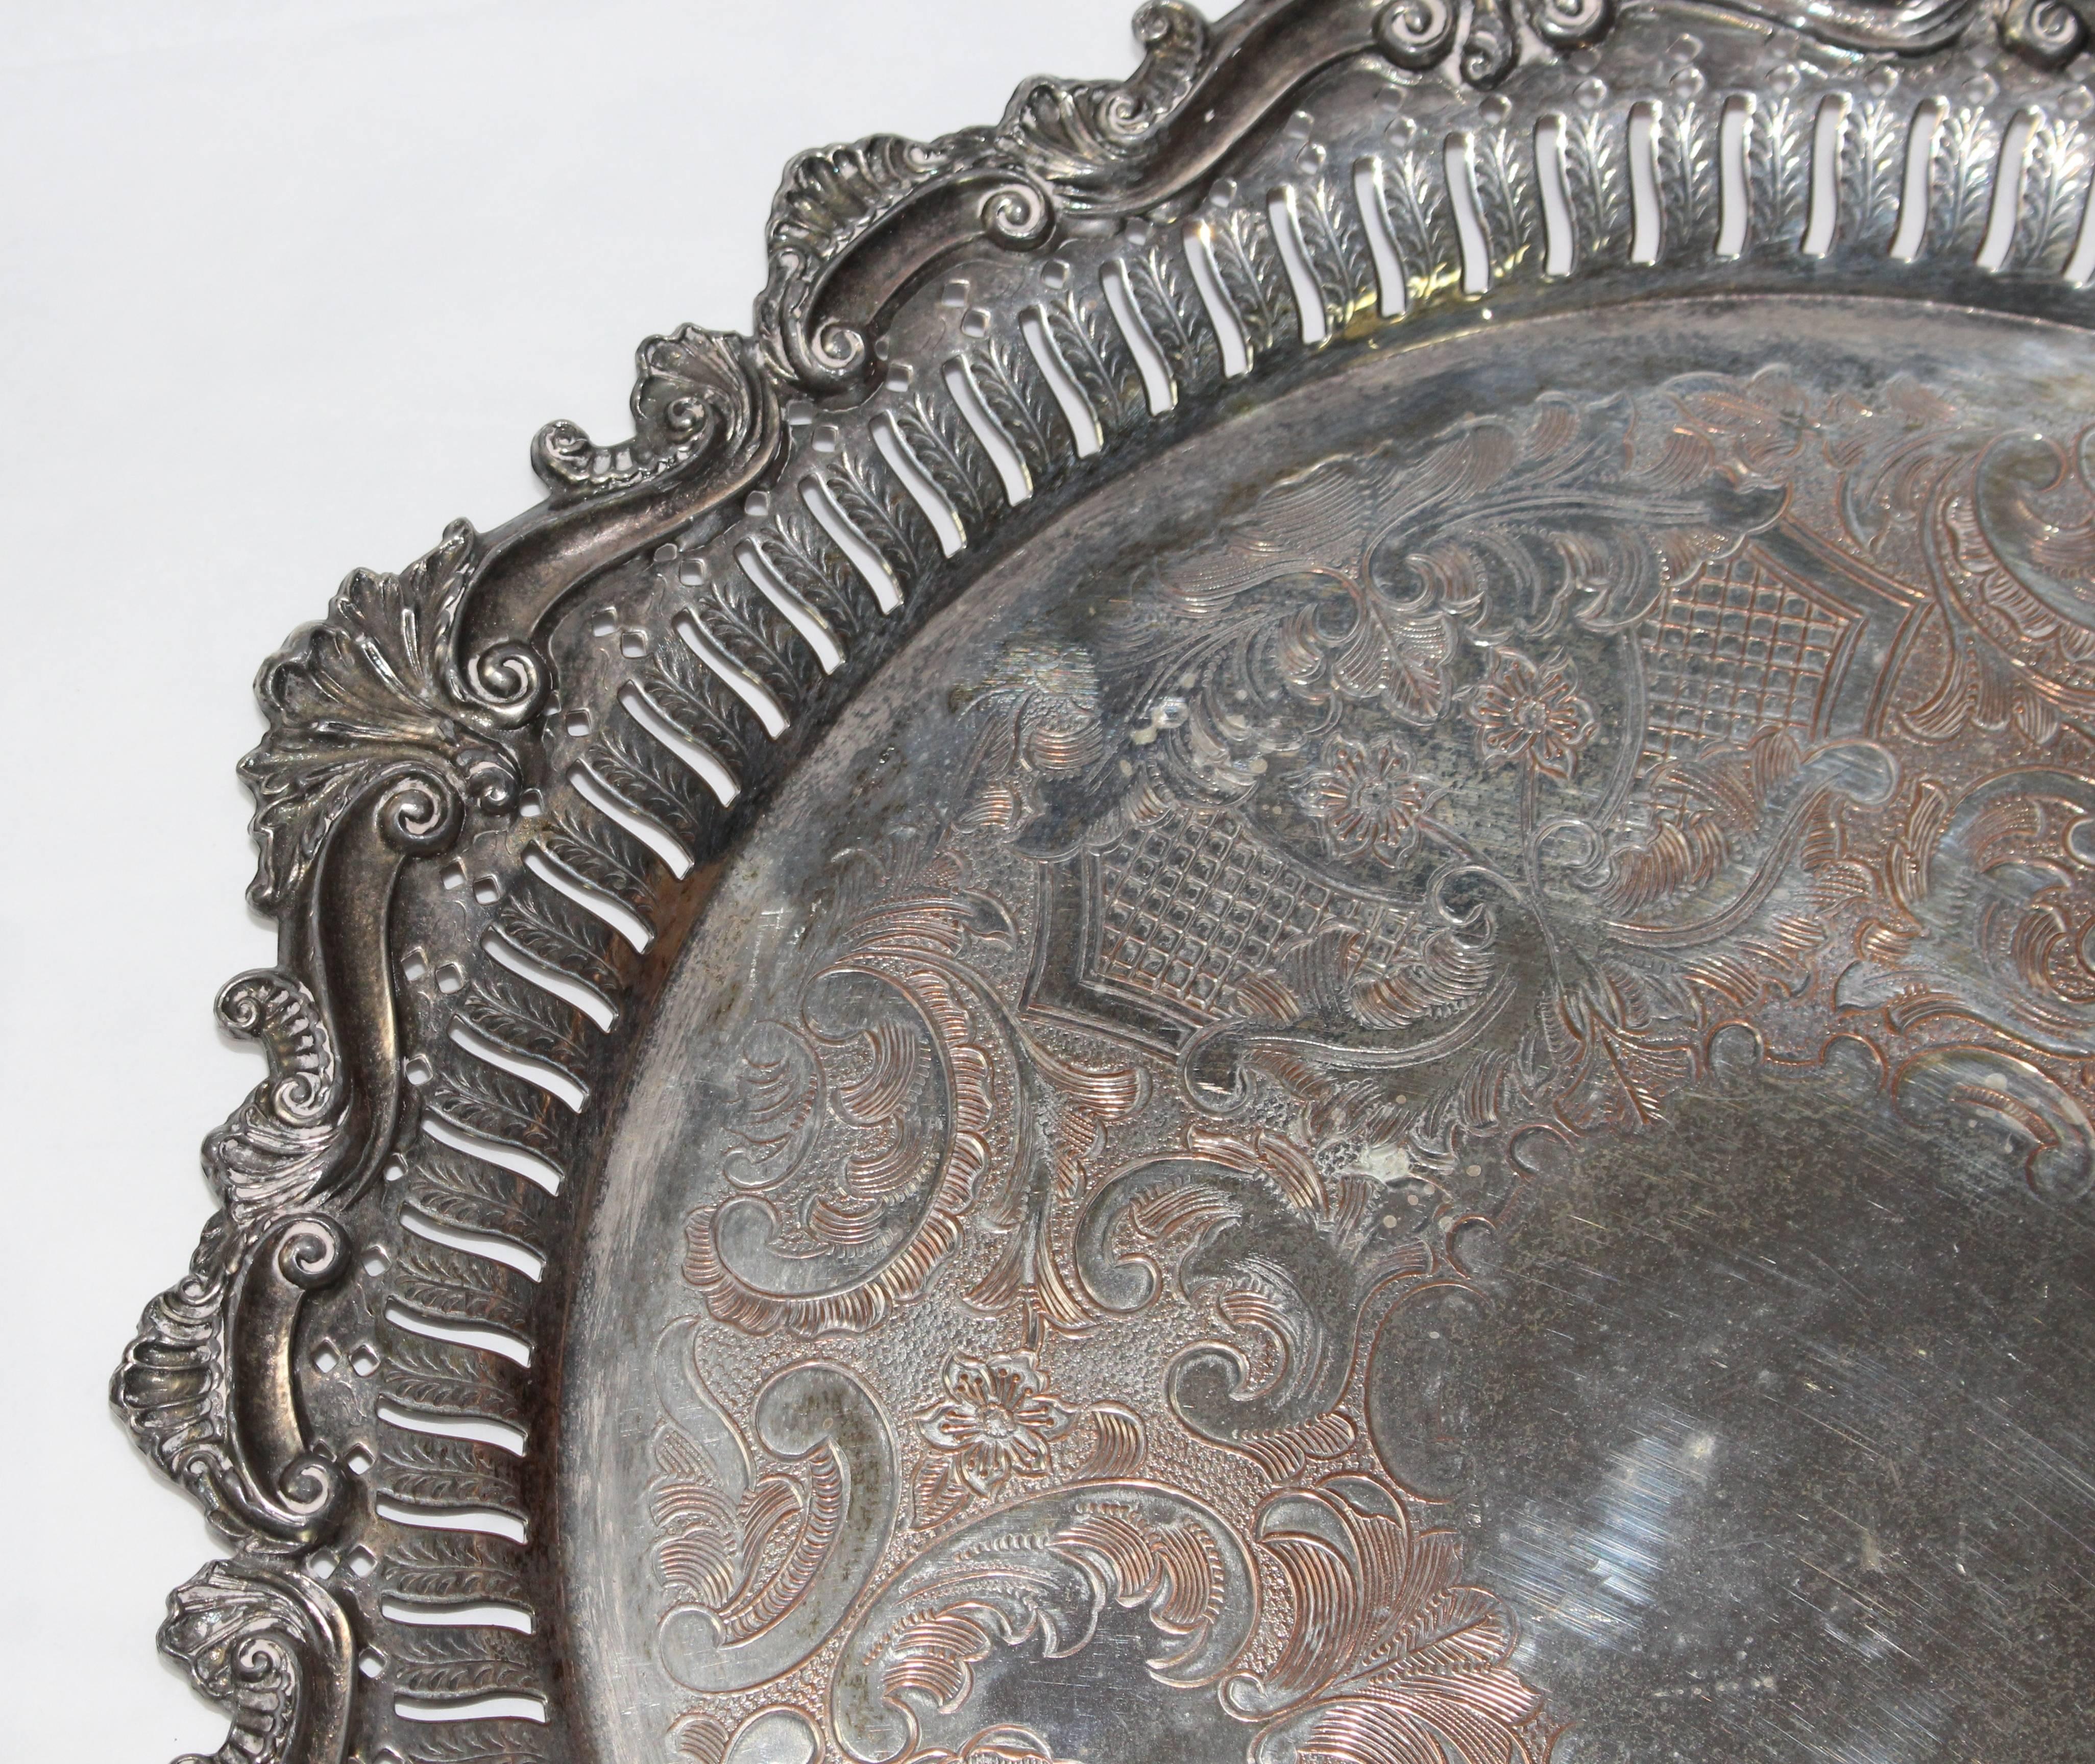 Heavy Ornate Engraved Antique Silver Plated on Copper Charger Tray 1